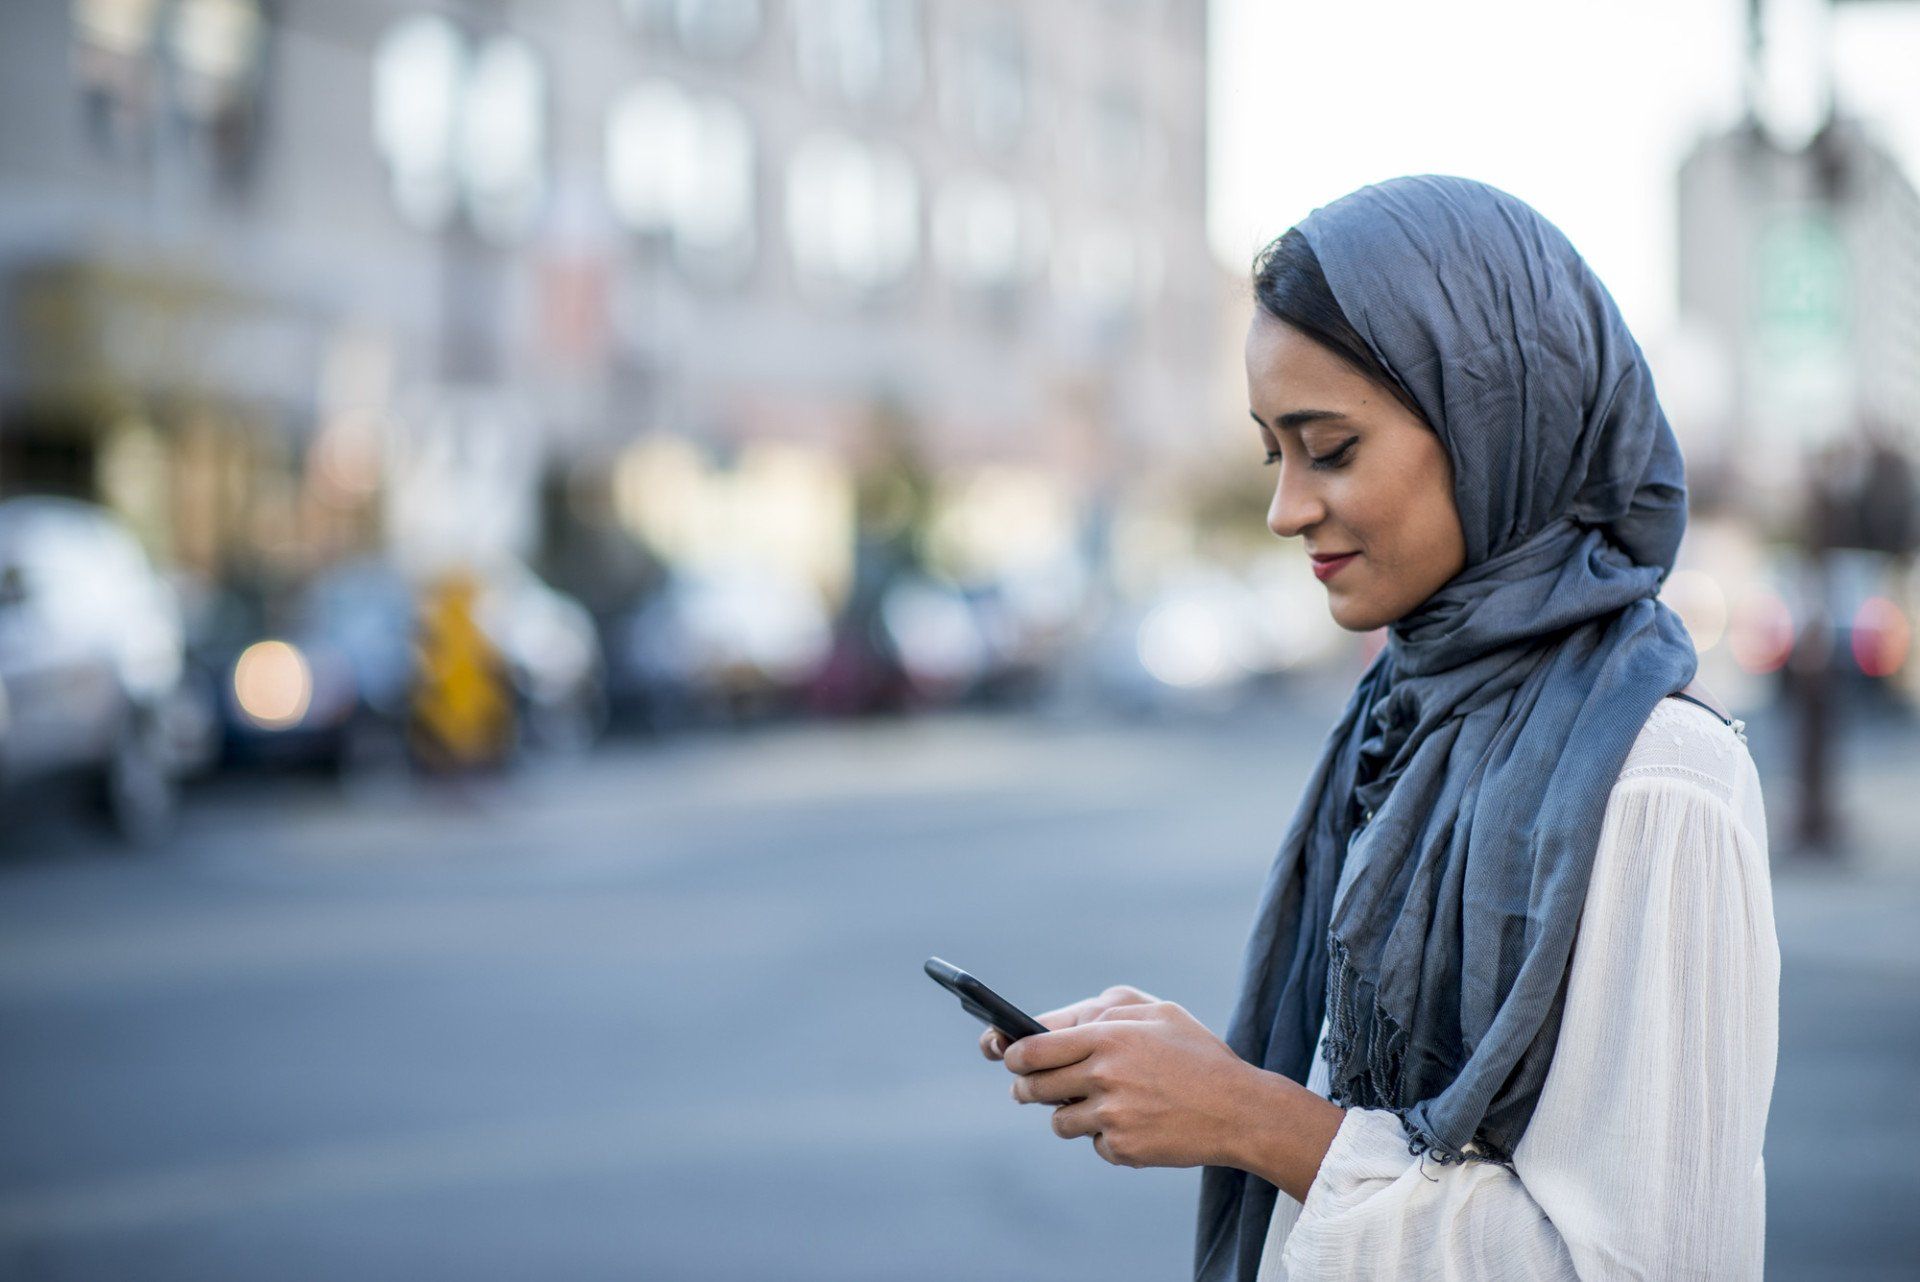 A Muslim woman is outdoors on a sunny day. She is wearing casual clothing and a head scarf. She is standing near a road and sending a message with her smartphone.